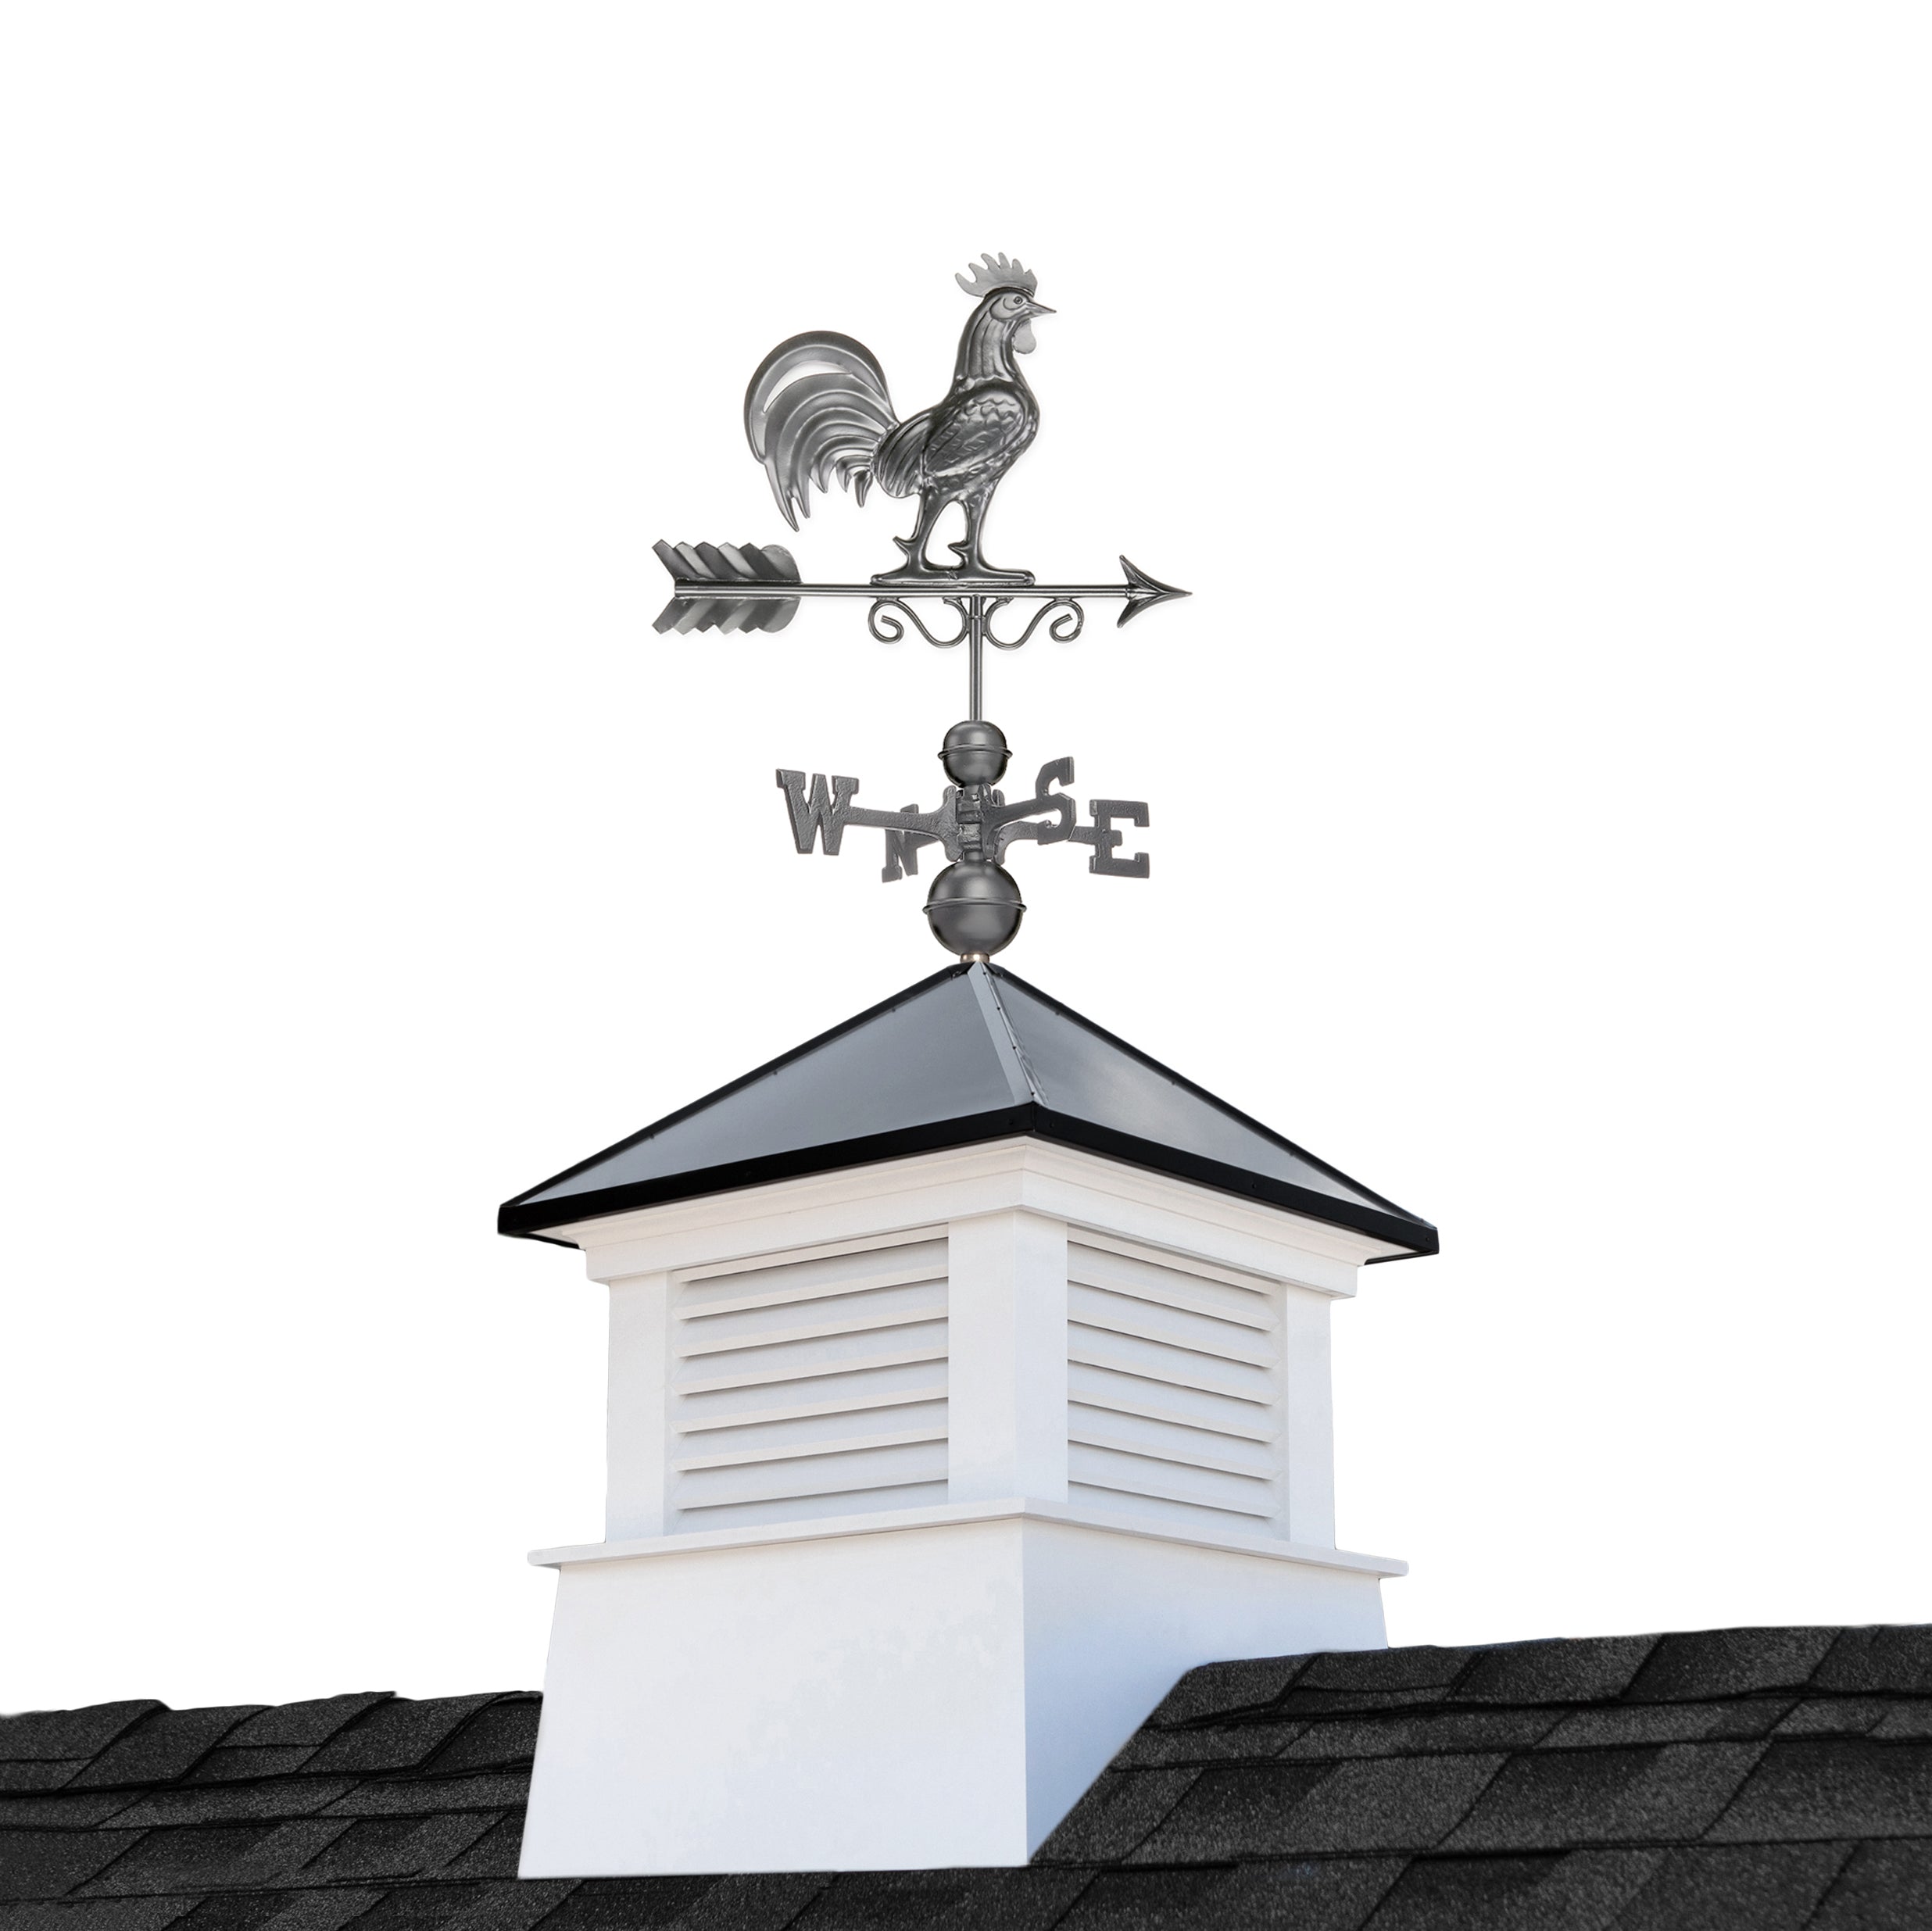 26" Square Manchester Vinyl Cupola with Black Aluminum roof and Dark Zinc Aluminum Rooster Weathervane